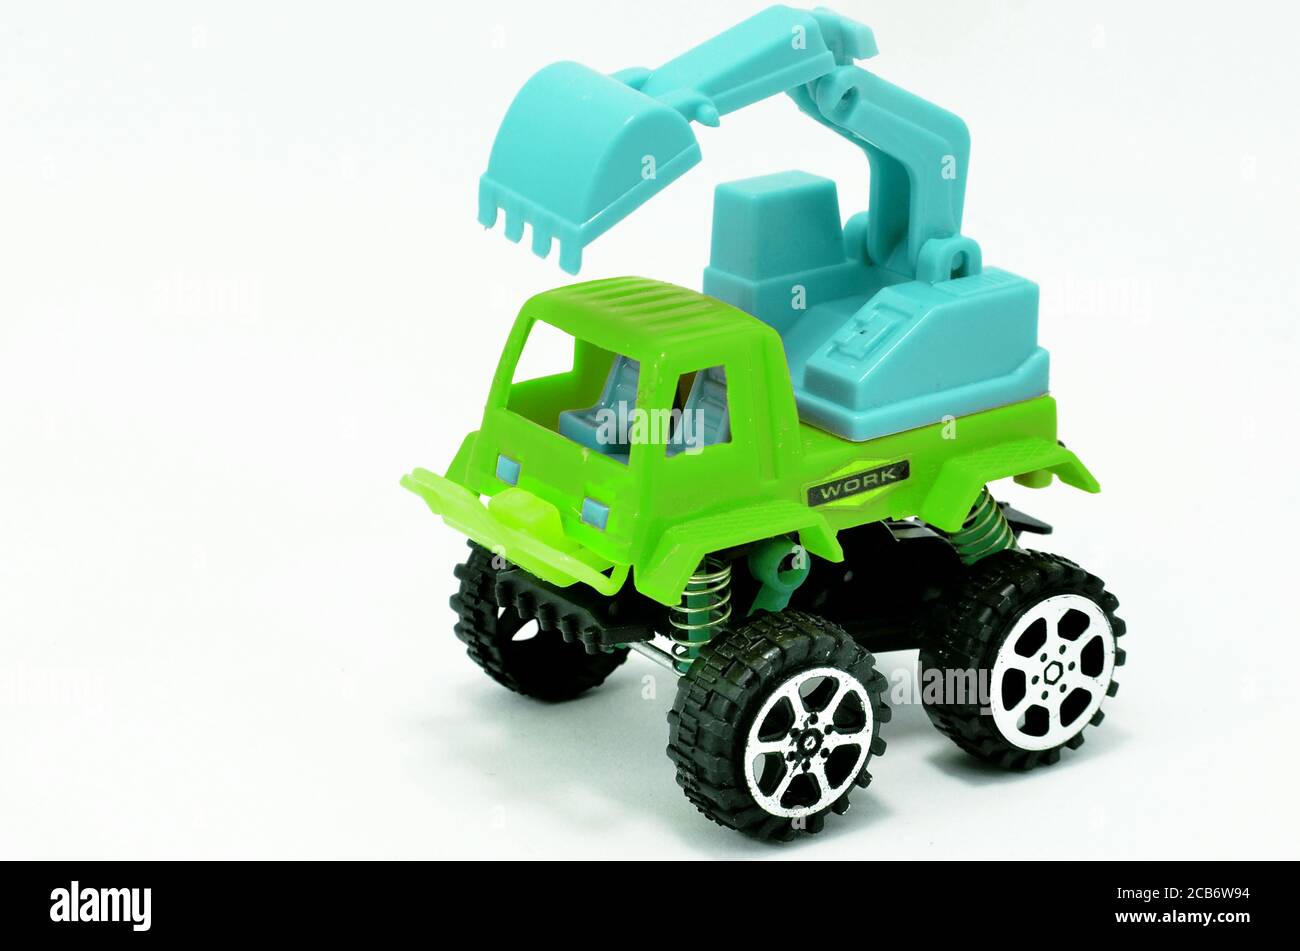 Car plastic truck and excavator toy for kids to have fun with there learning Stock Photo